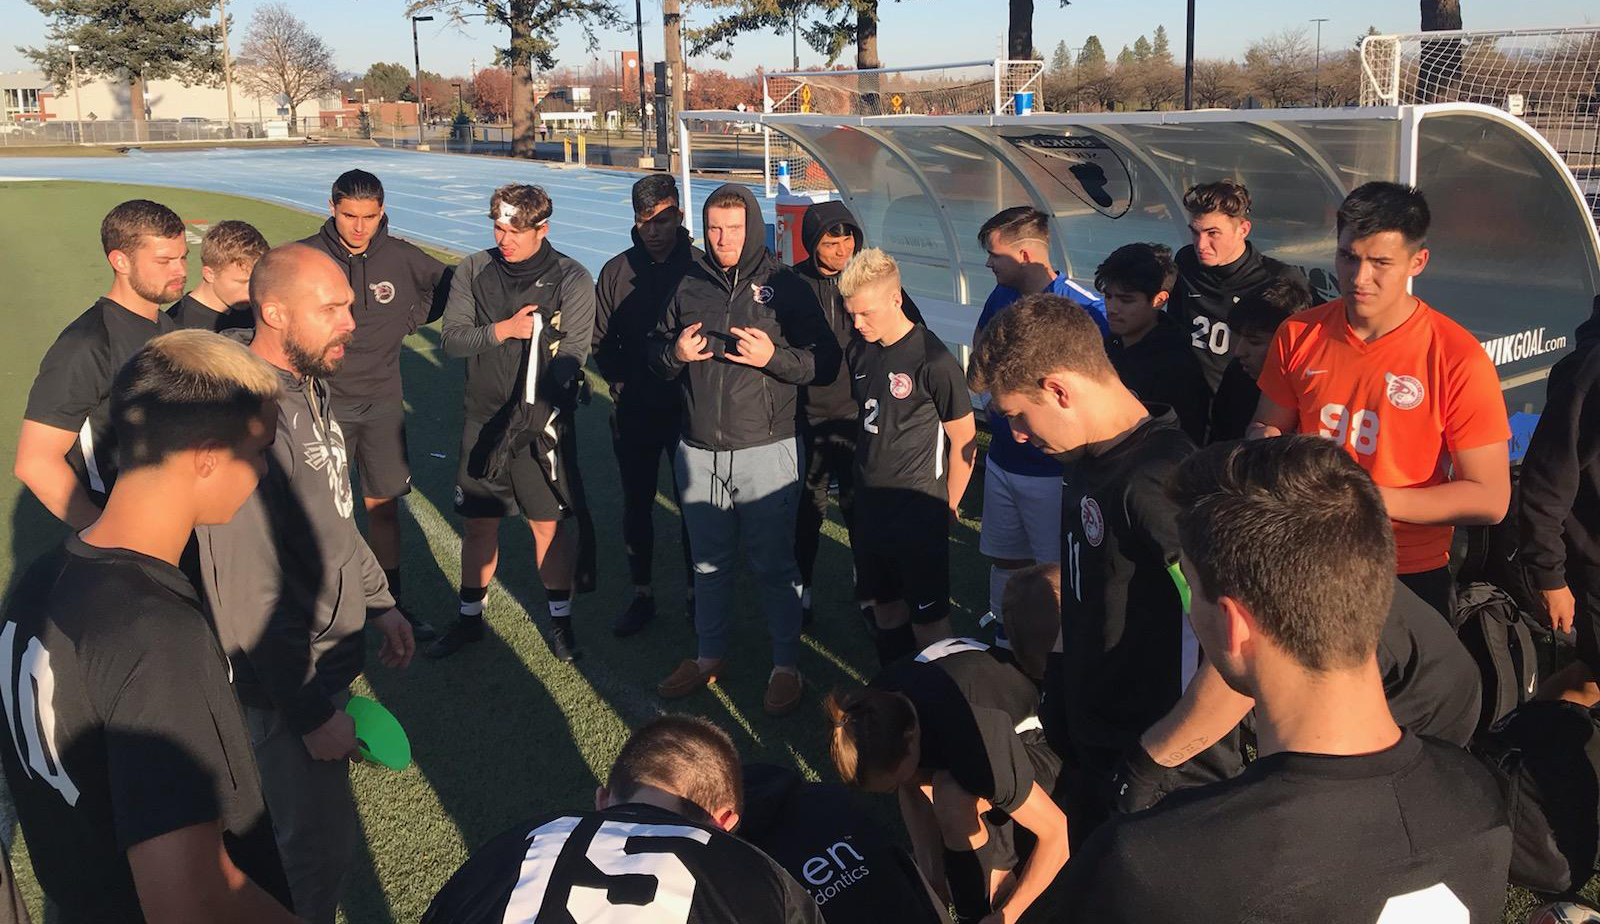 Men's Soccer ends season with first round playoff loss to Spokane